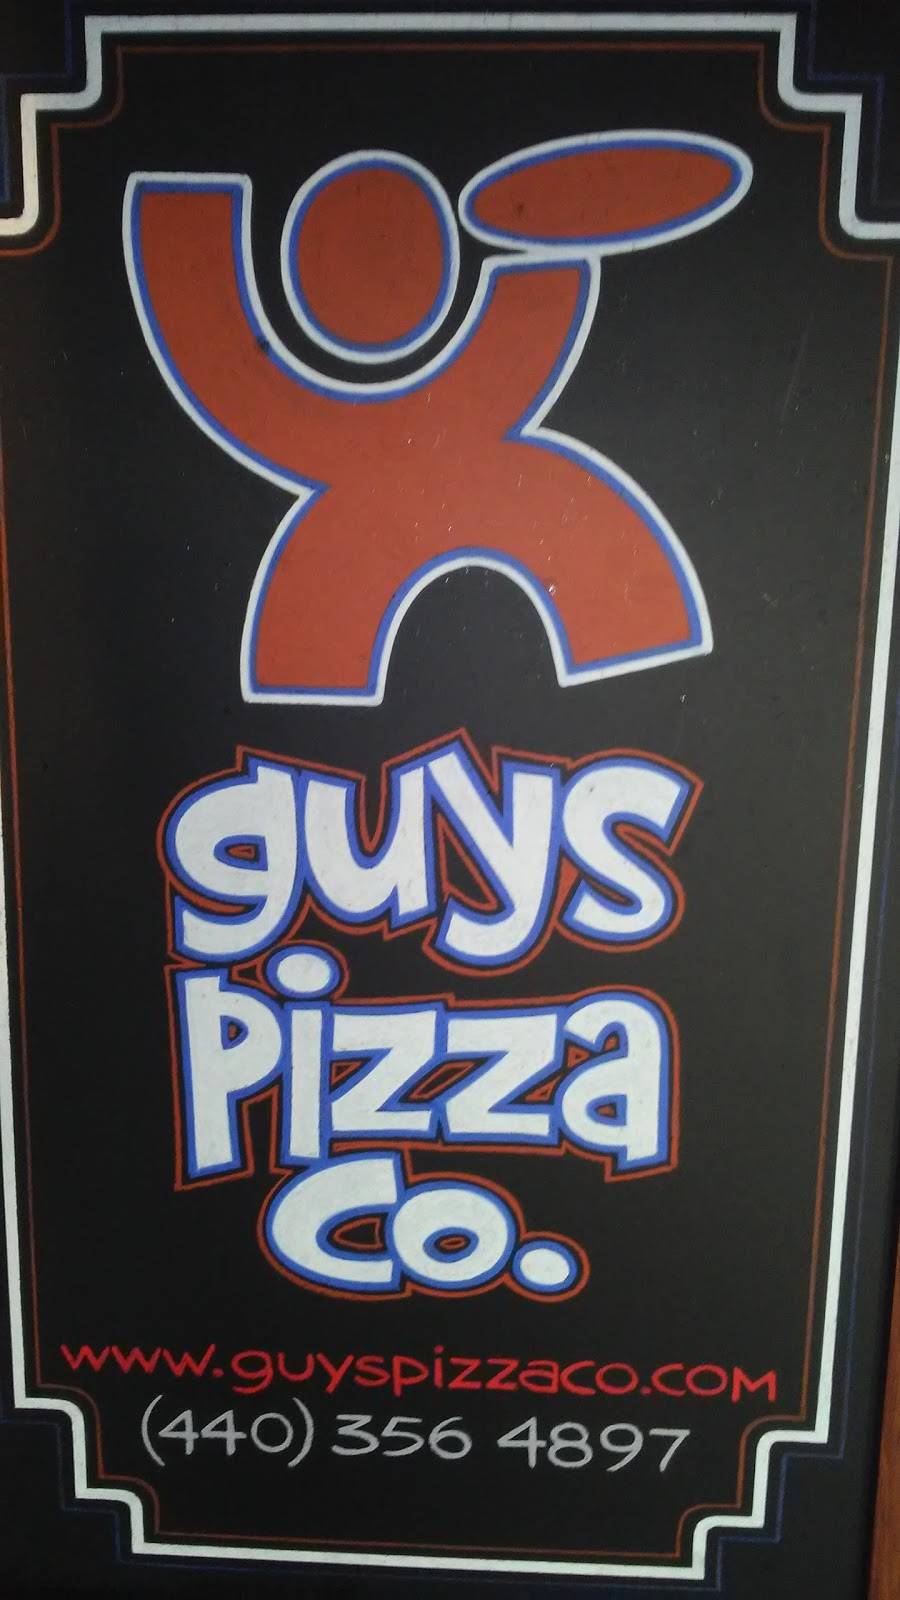 Guys Pizza | meal delivery | 859 E 222nd St, Euclid, OH 44123, USA | 2167974897 OR +1 216-797-4897